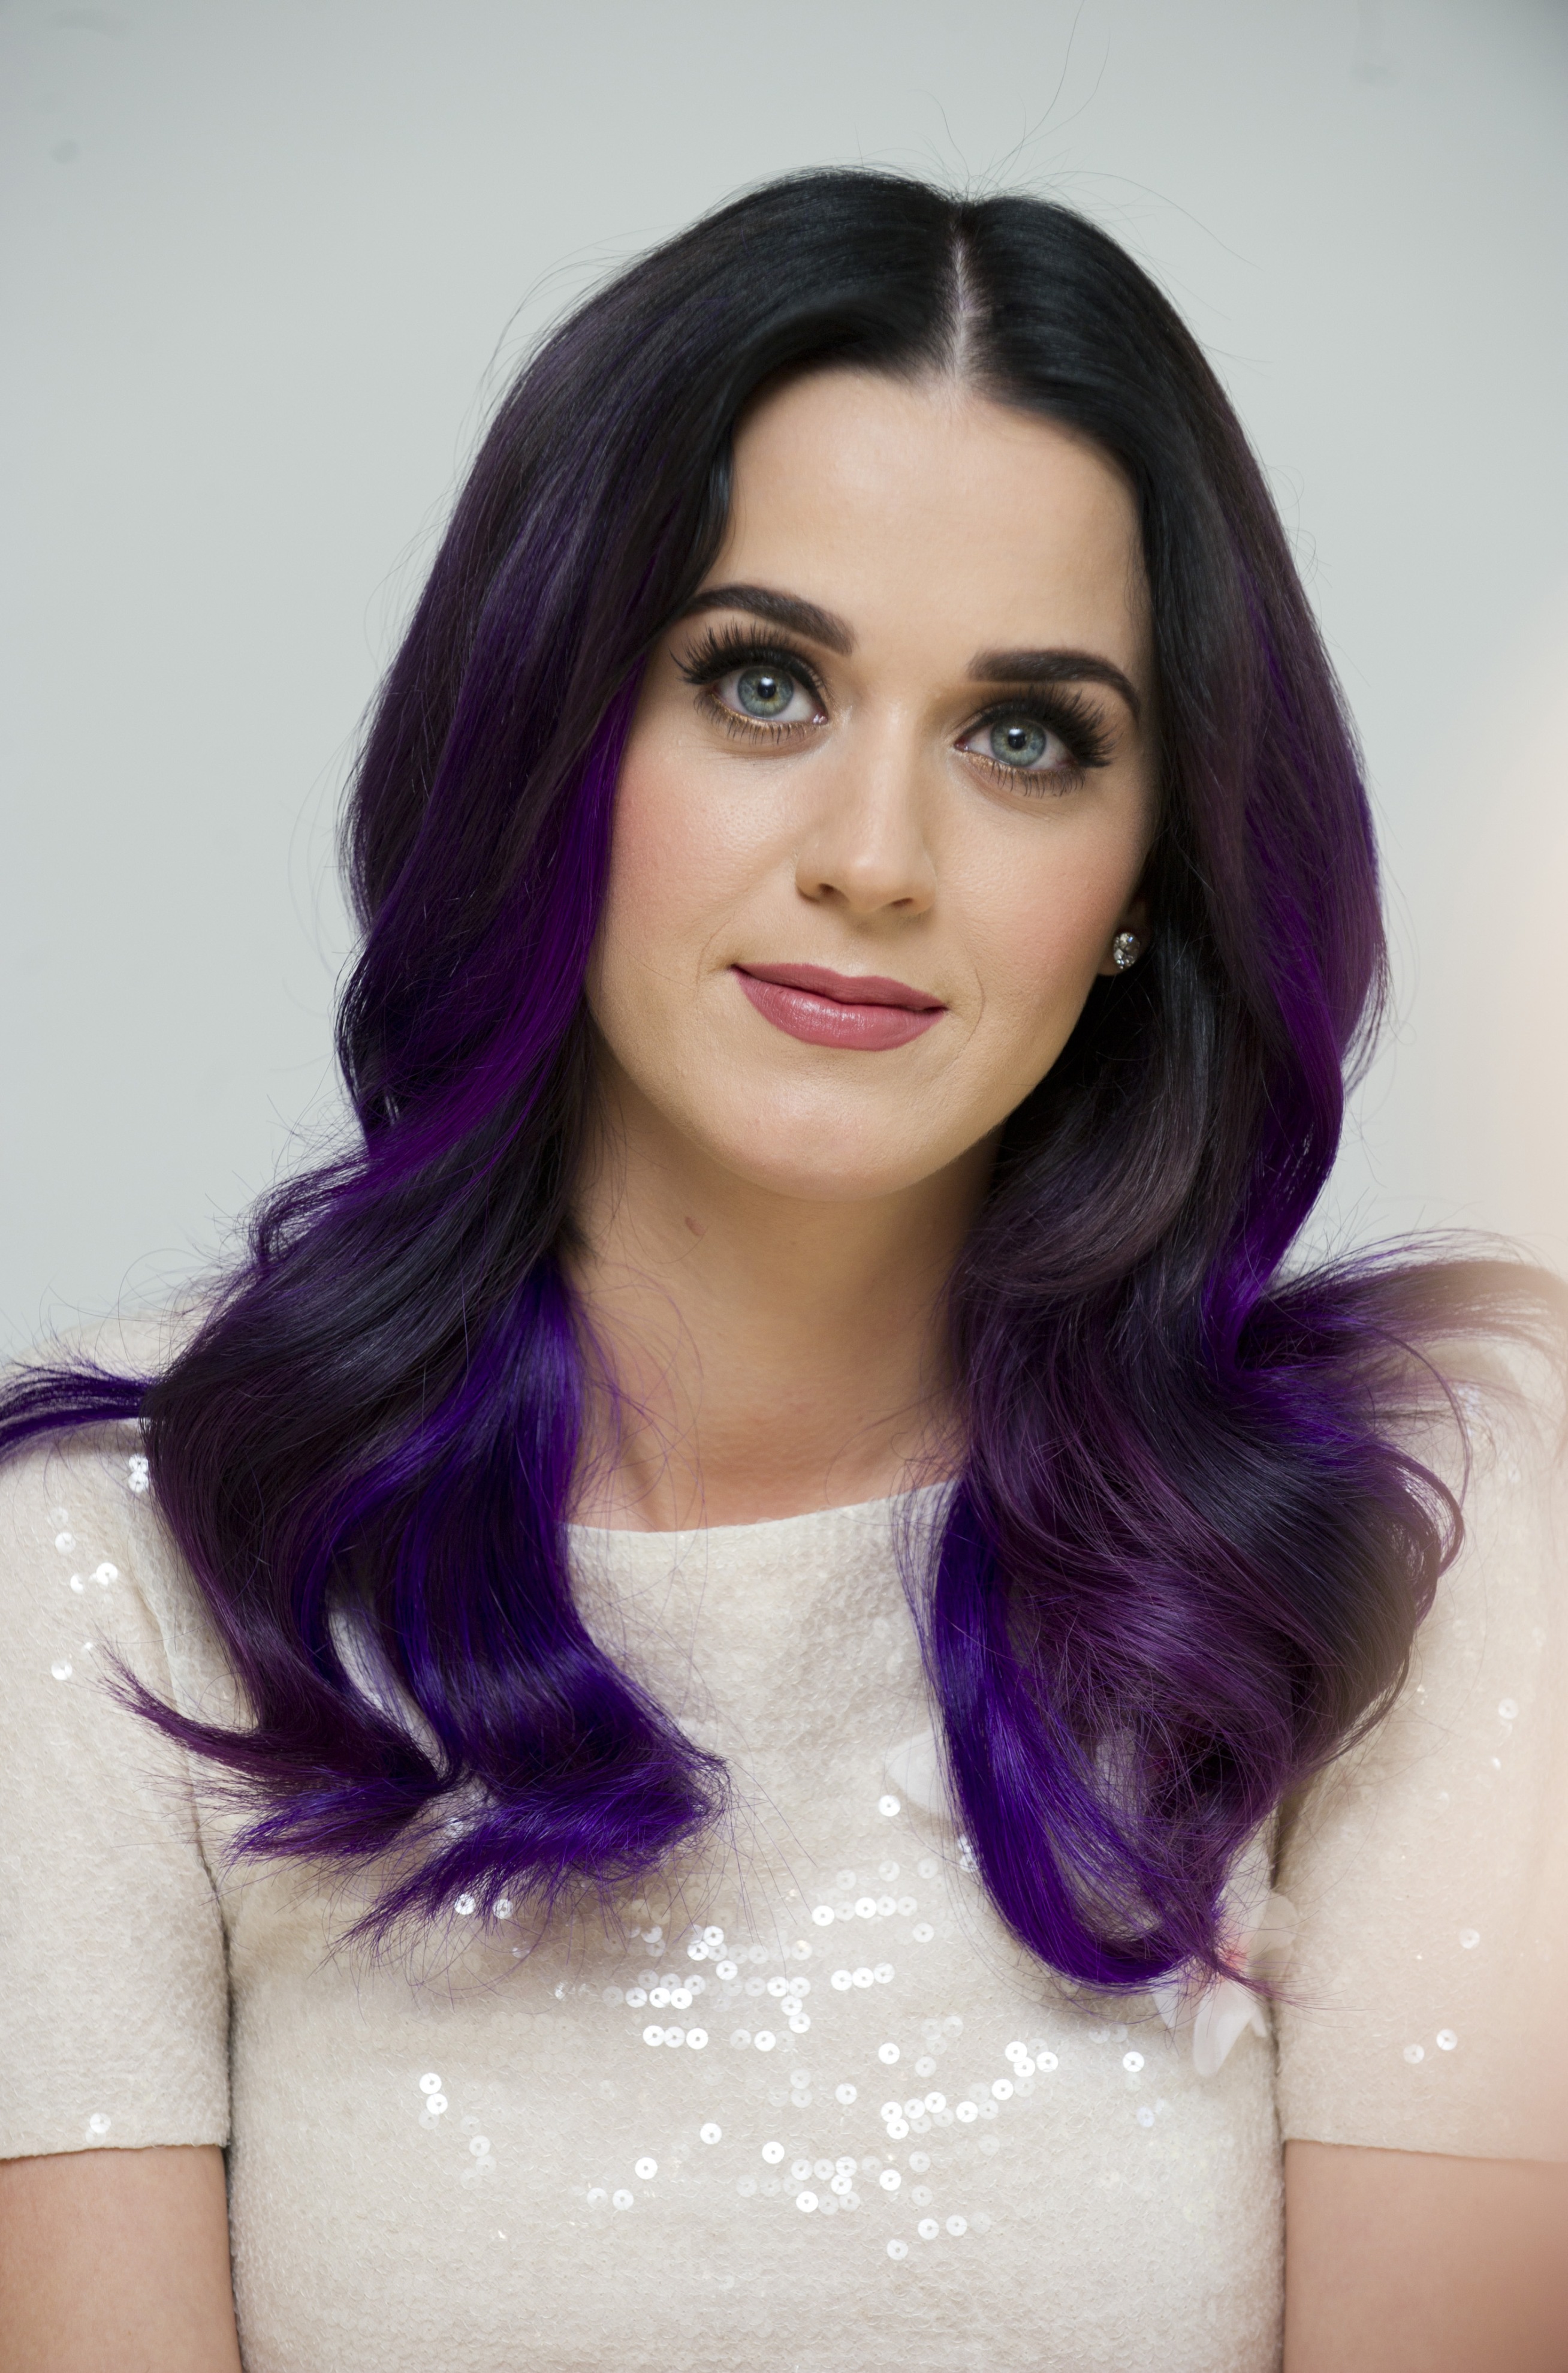 Katy Perry photo 1553 of 2548 pics, wallpaper - photo #503880 - ThePlace2